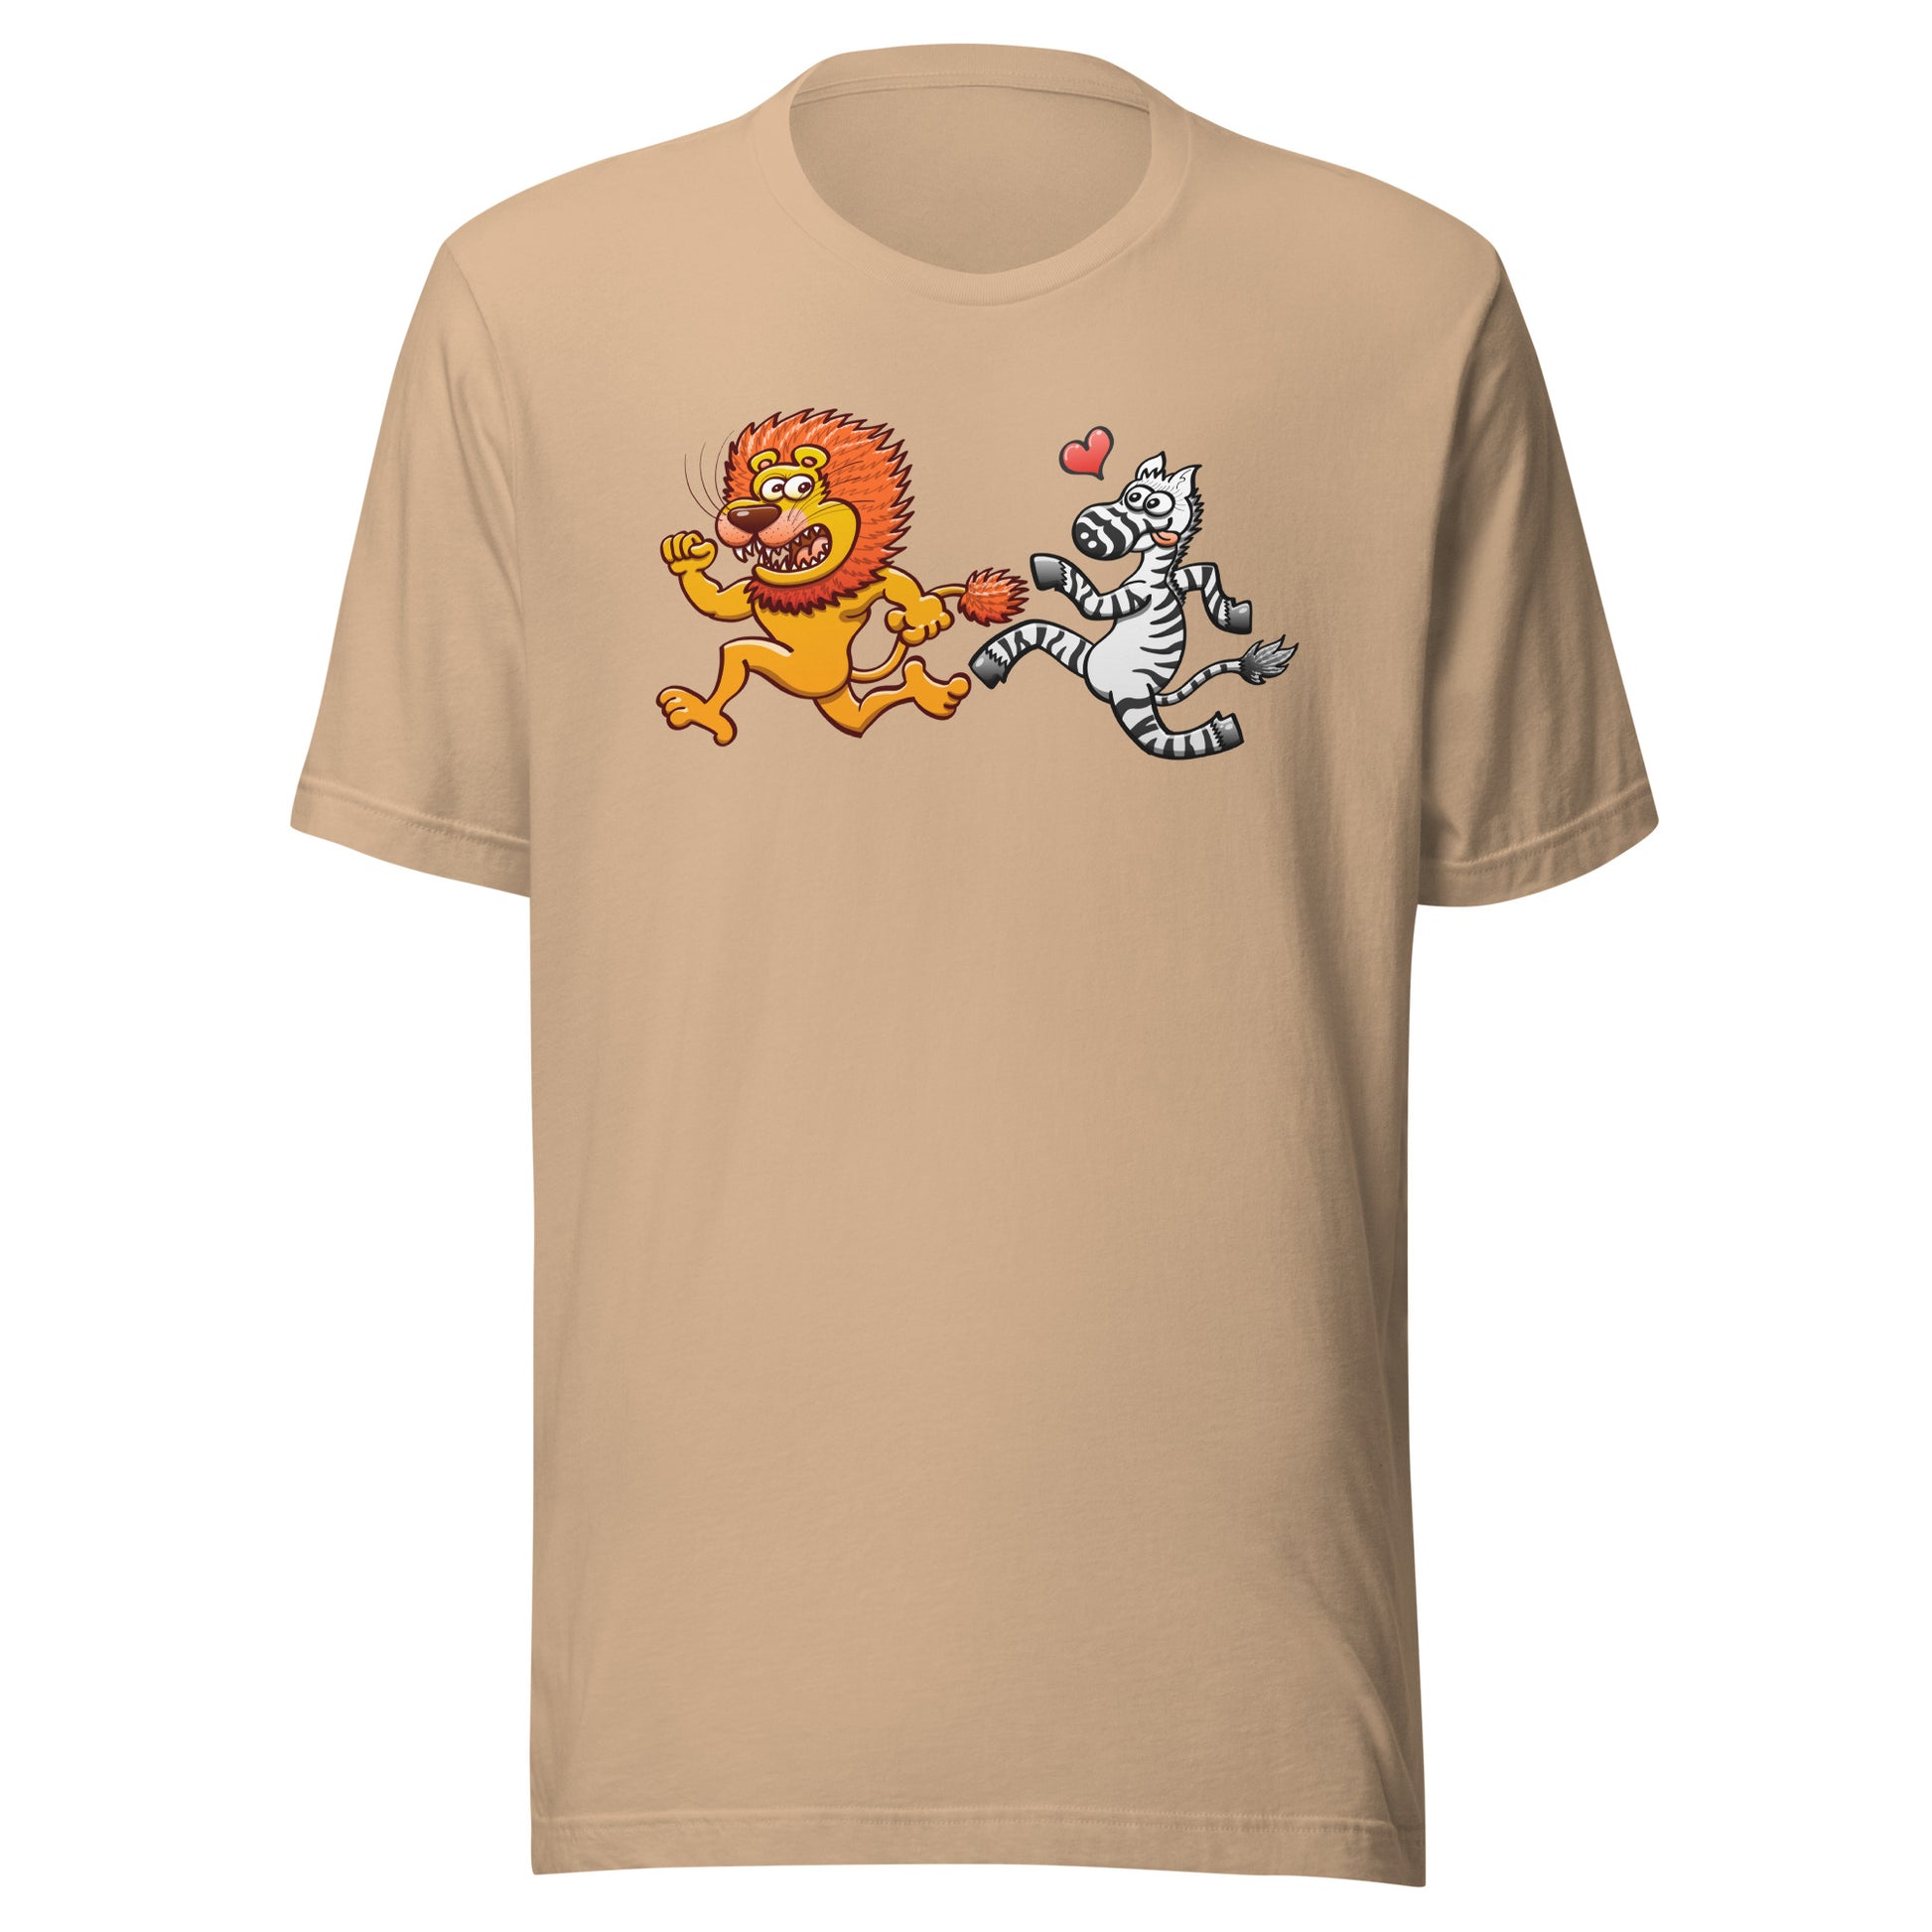 Wild zebra in love runs after a scared lion Unisex t-shirt. Tan color. Front view